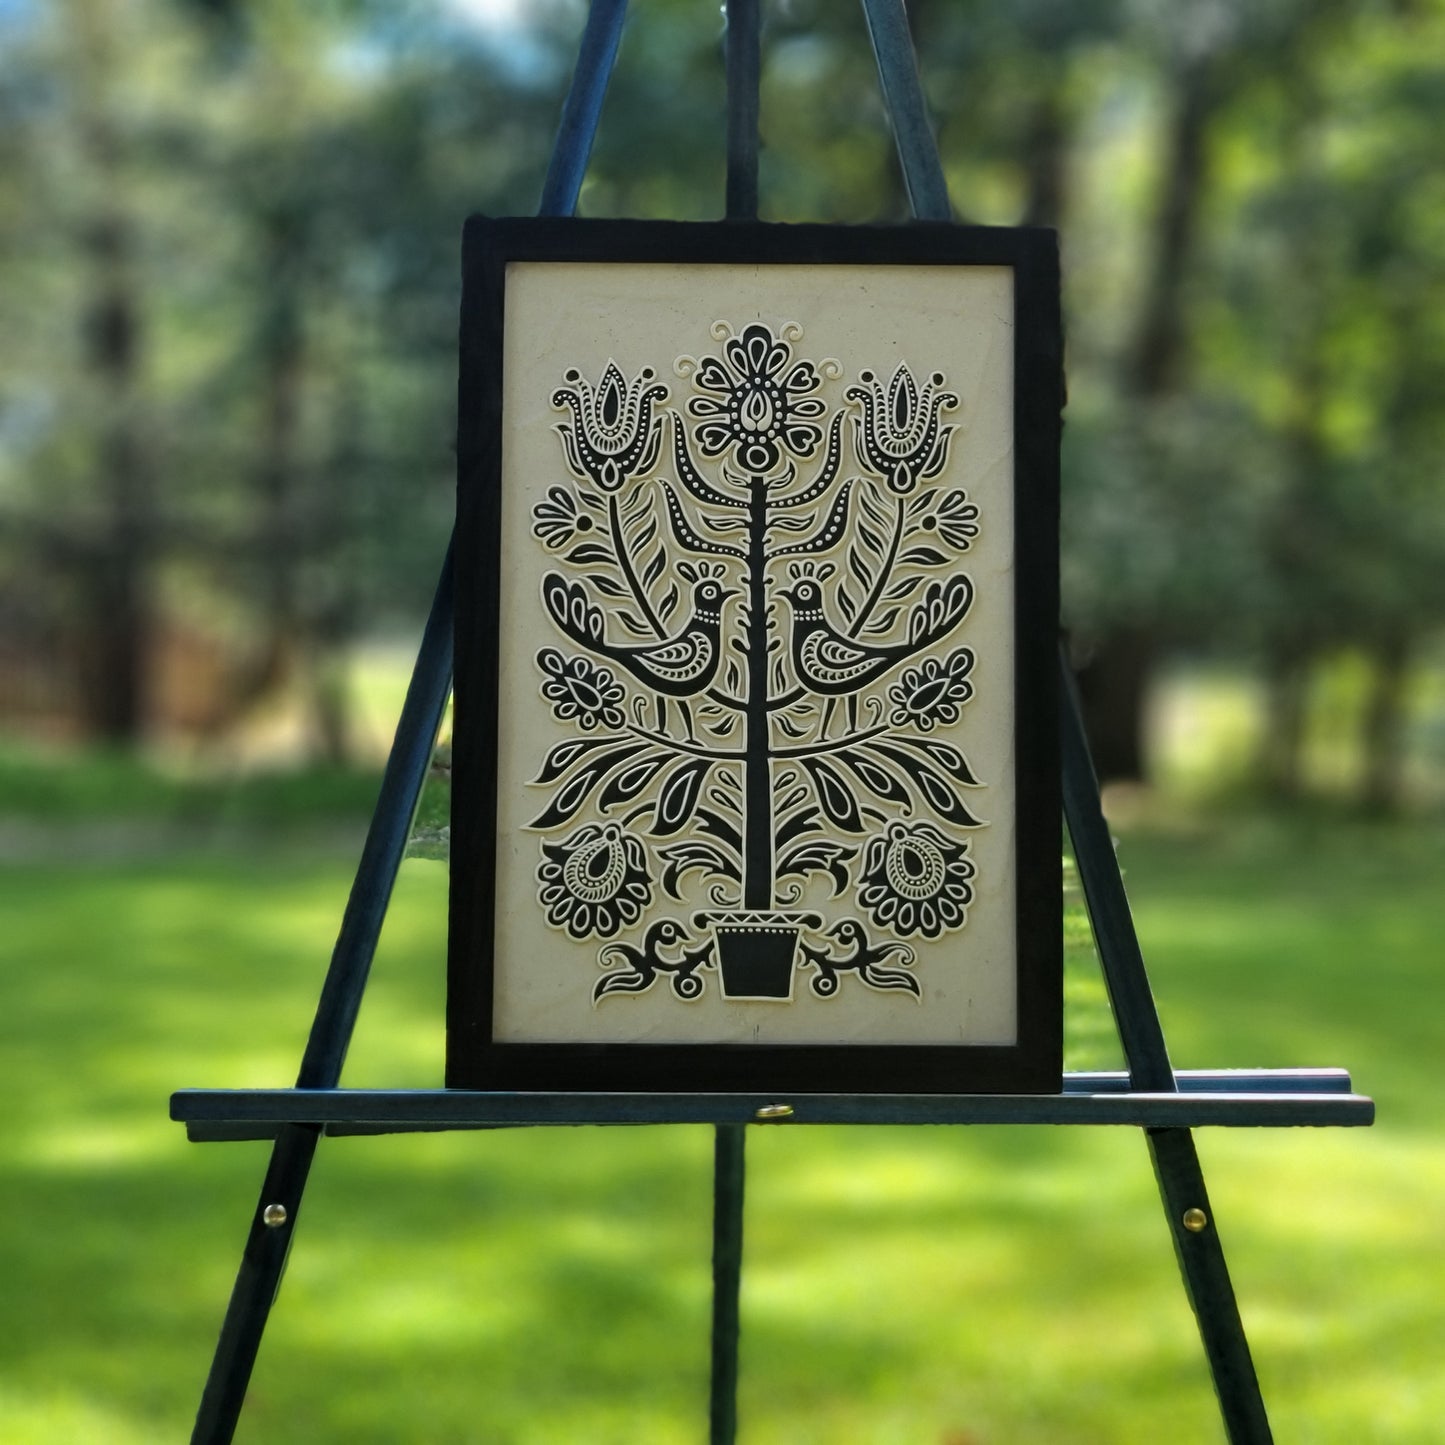 Black and White Tree in Vase Relief Art Frame